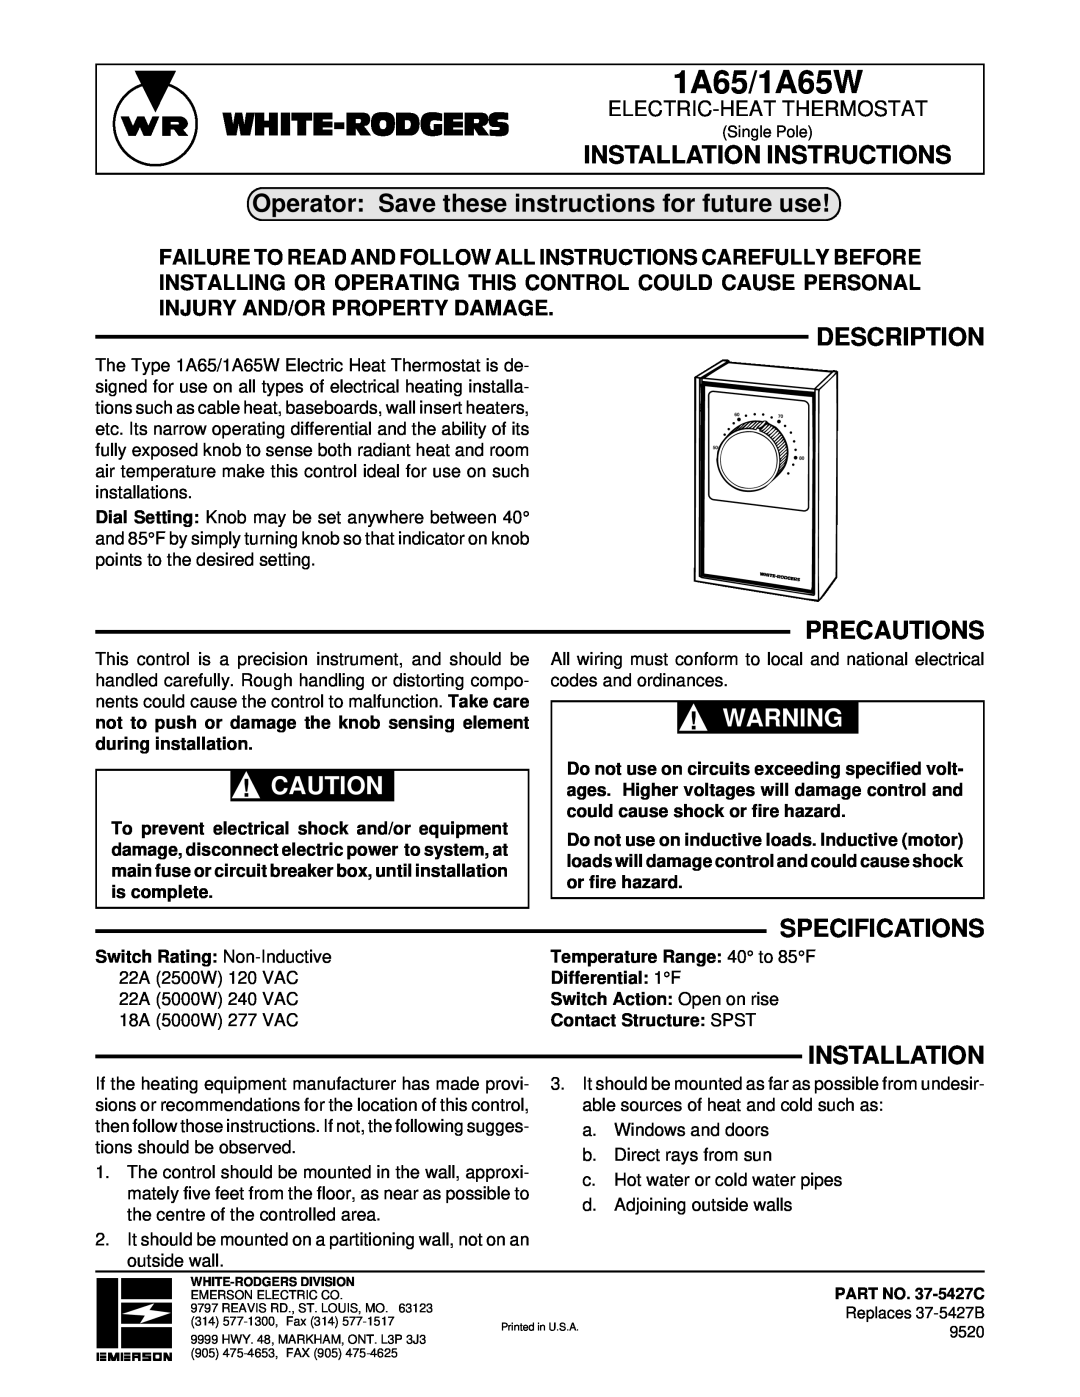 White Rodgers 1A65 installation instructions Installation Instructions, Operator Save these instructions for future use 